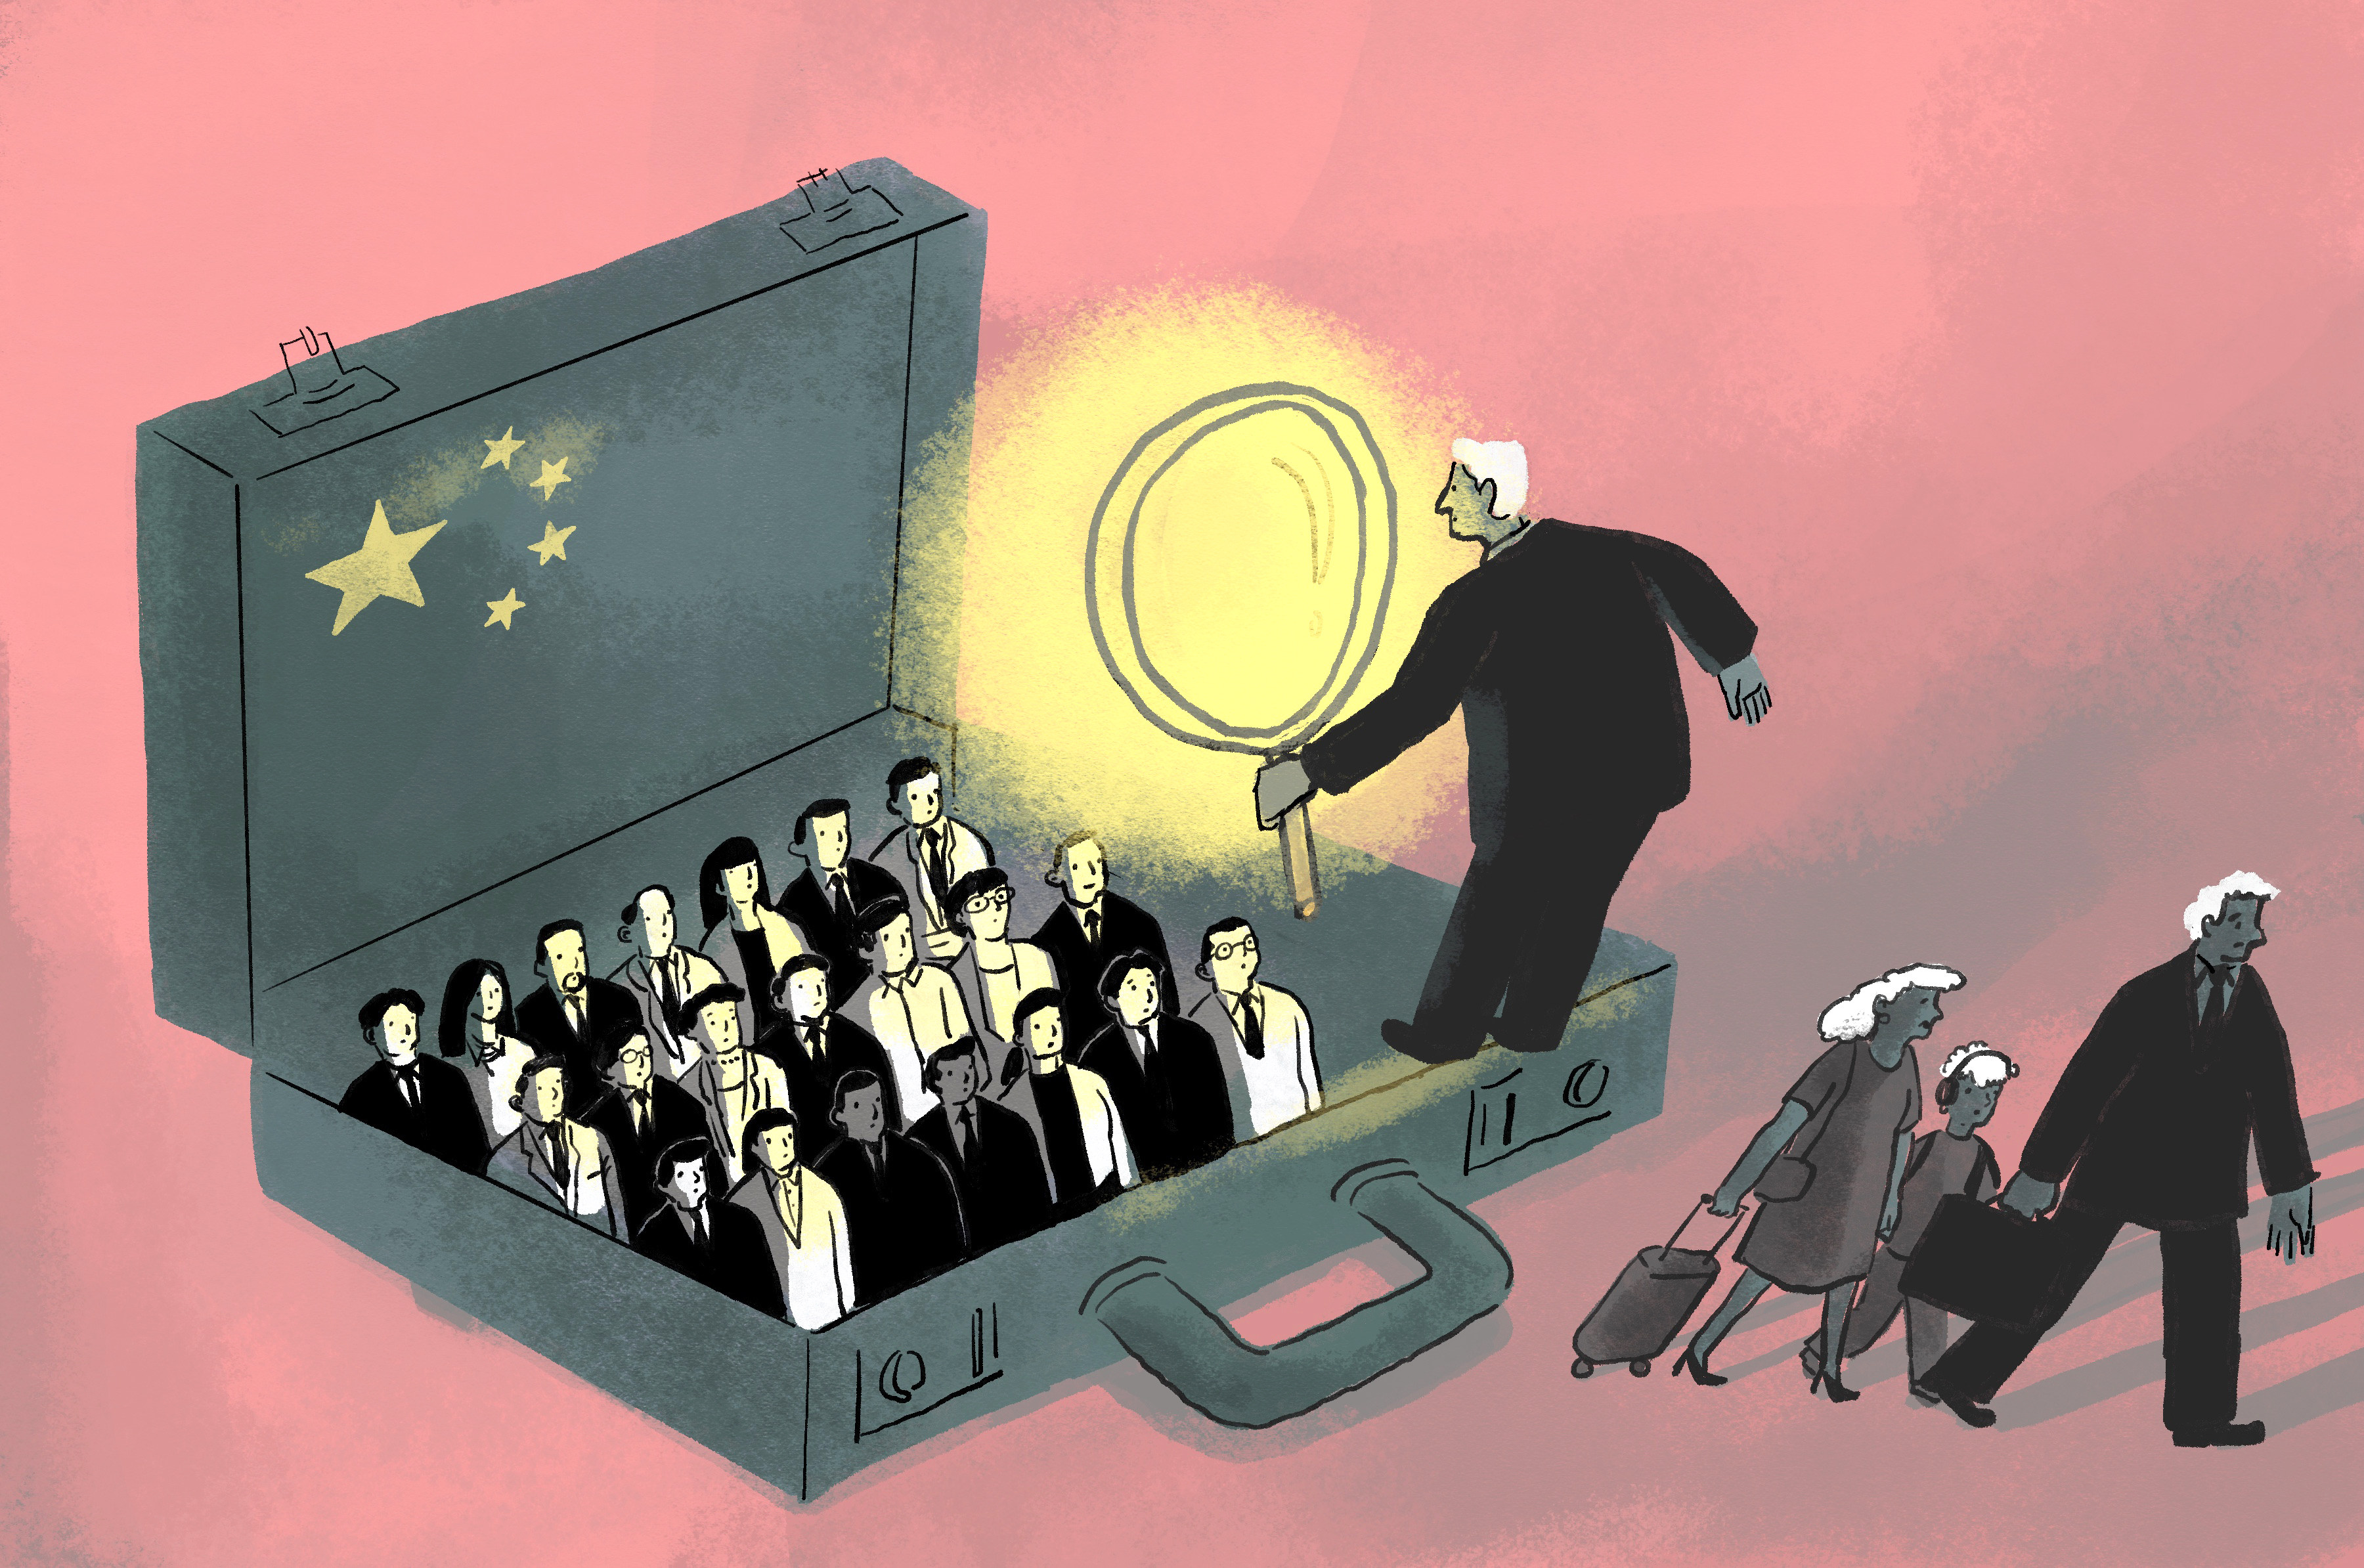 Foreign companies in China are looking to hire local talent as zero-Covid policies make it difficult to find and retain expat workers. Illustration: Brian Wang